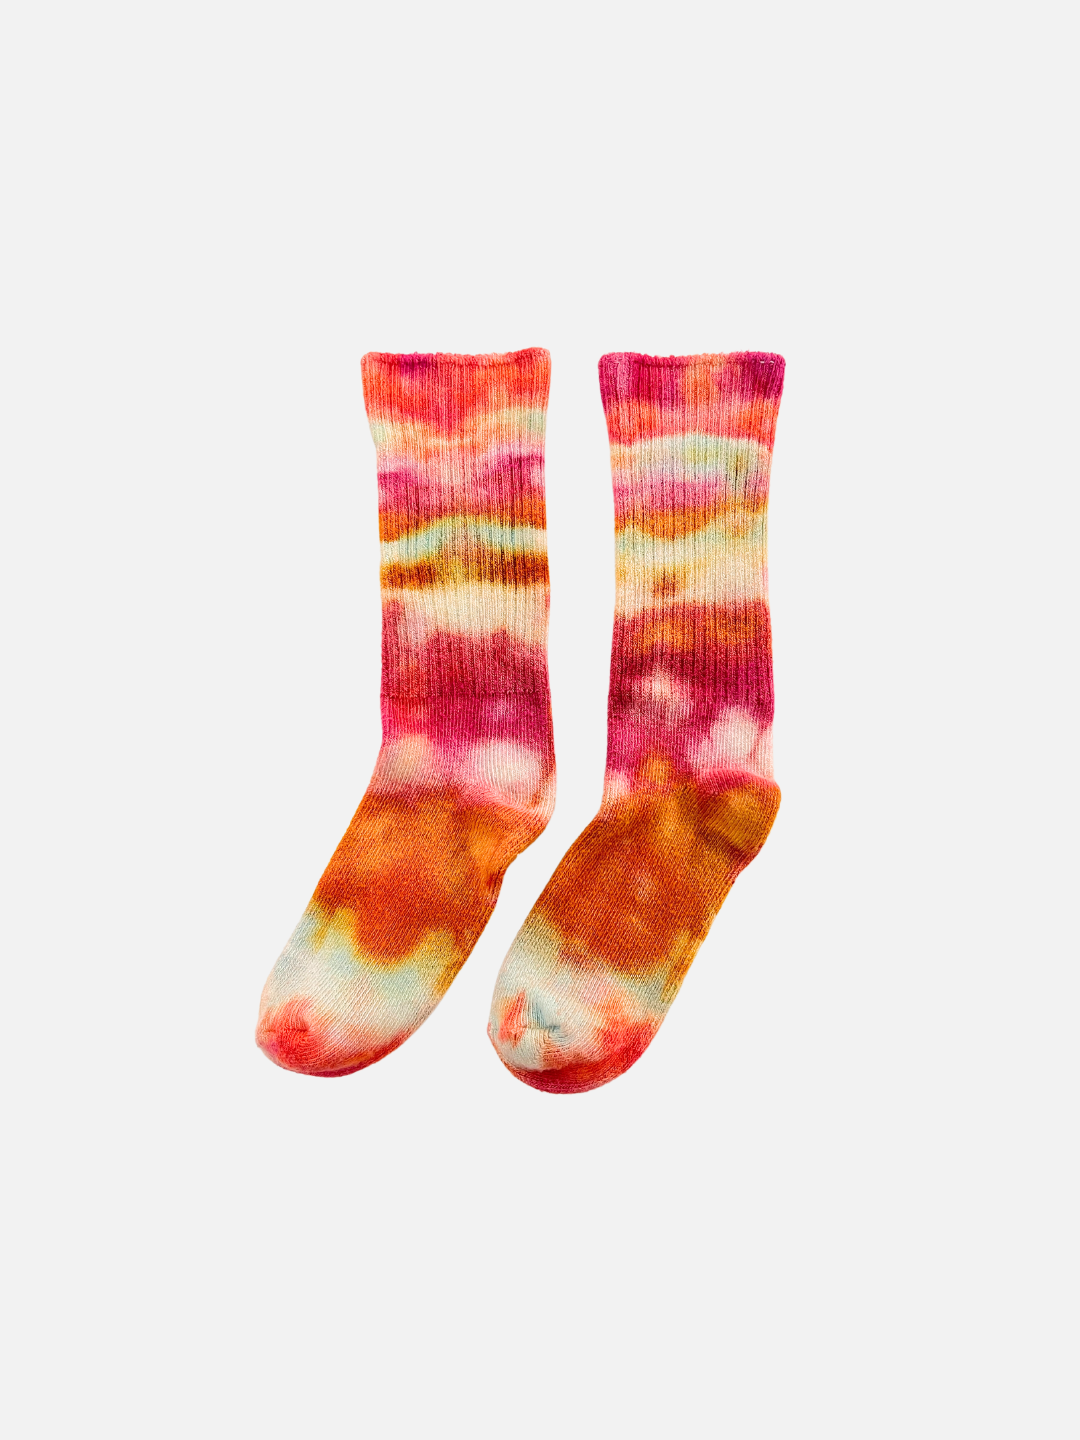 A pair of kids' ankle socks in dappled shades of orange and pink